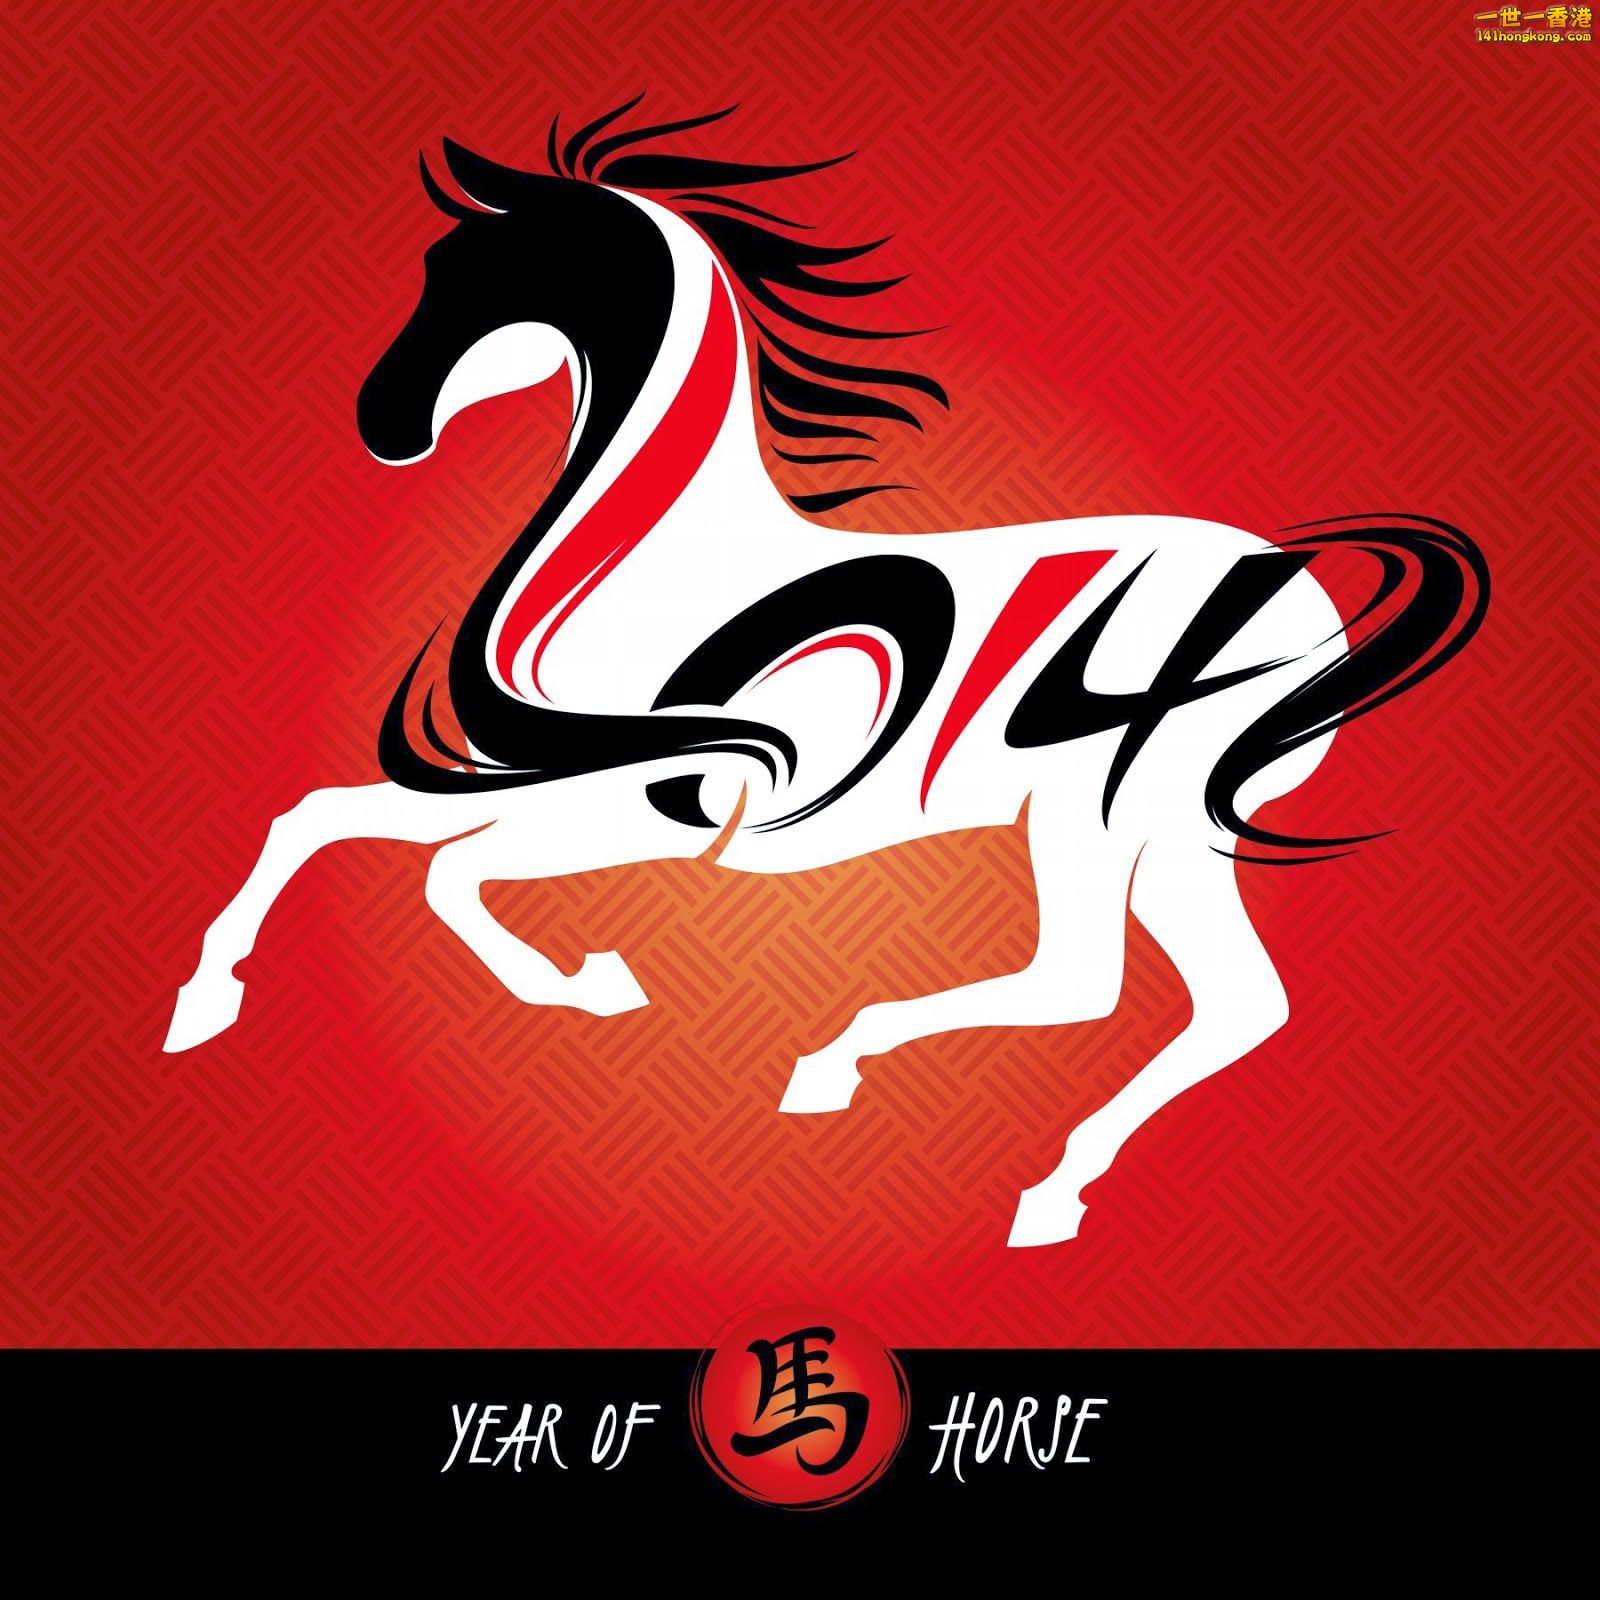 Chinese_New_Year_2014_of_the_horse_art_horse_red_background-ipad-wallpaper.jpg